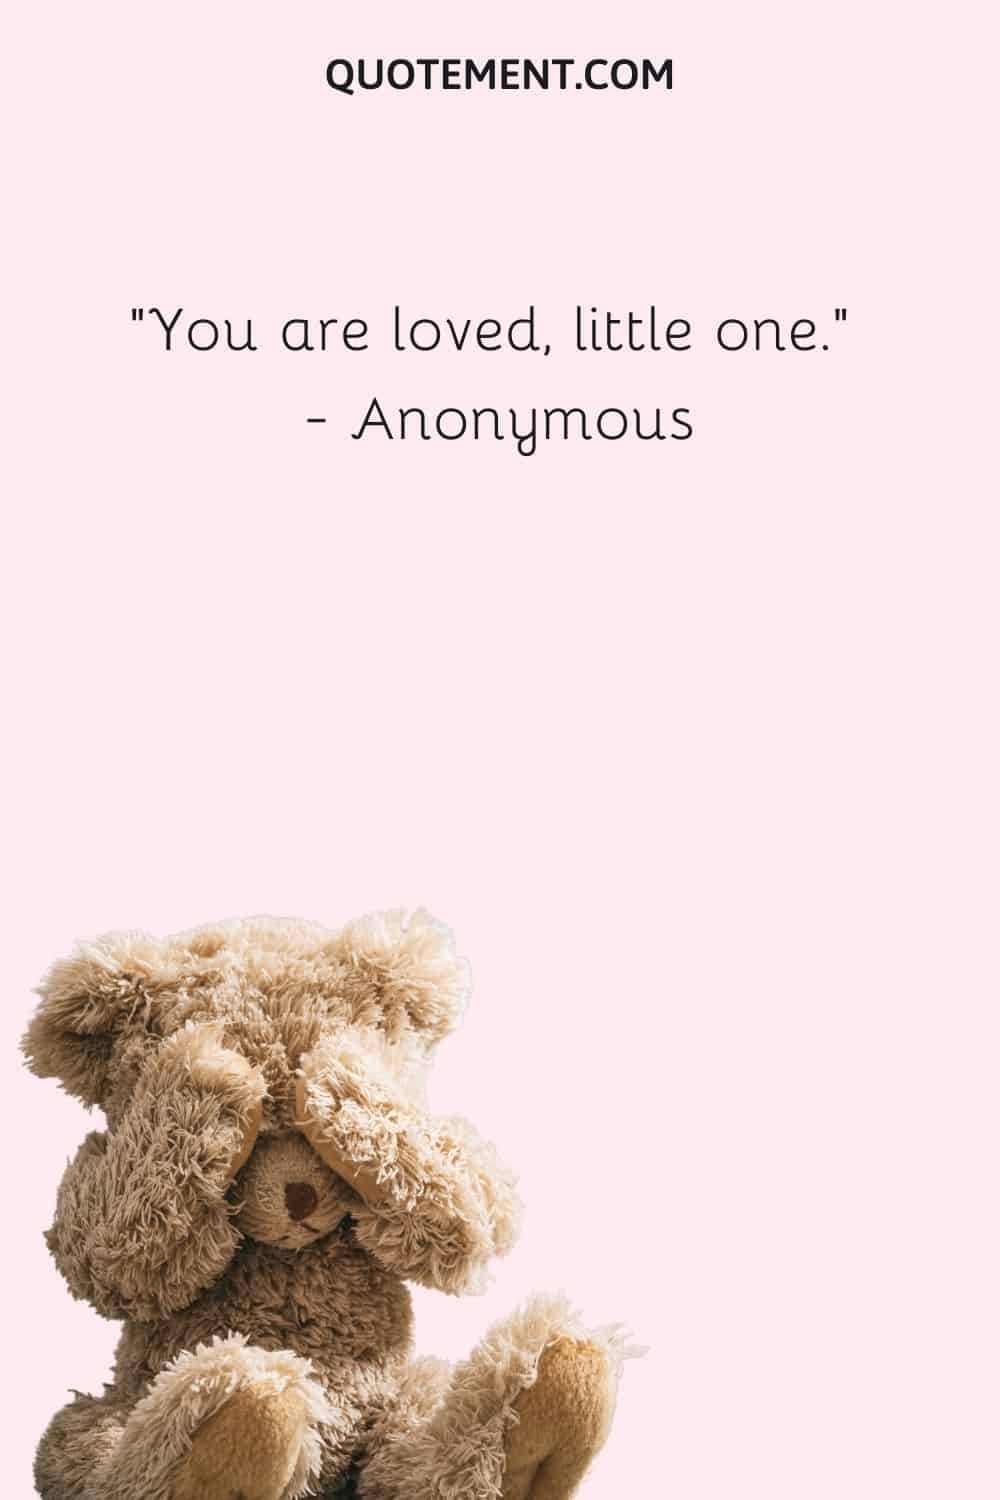 You are loved, little one. — Anonymous